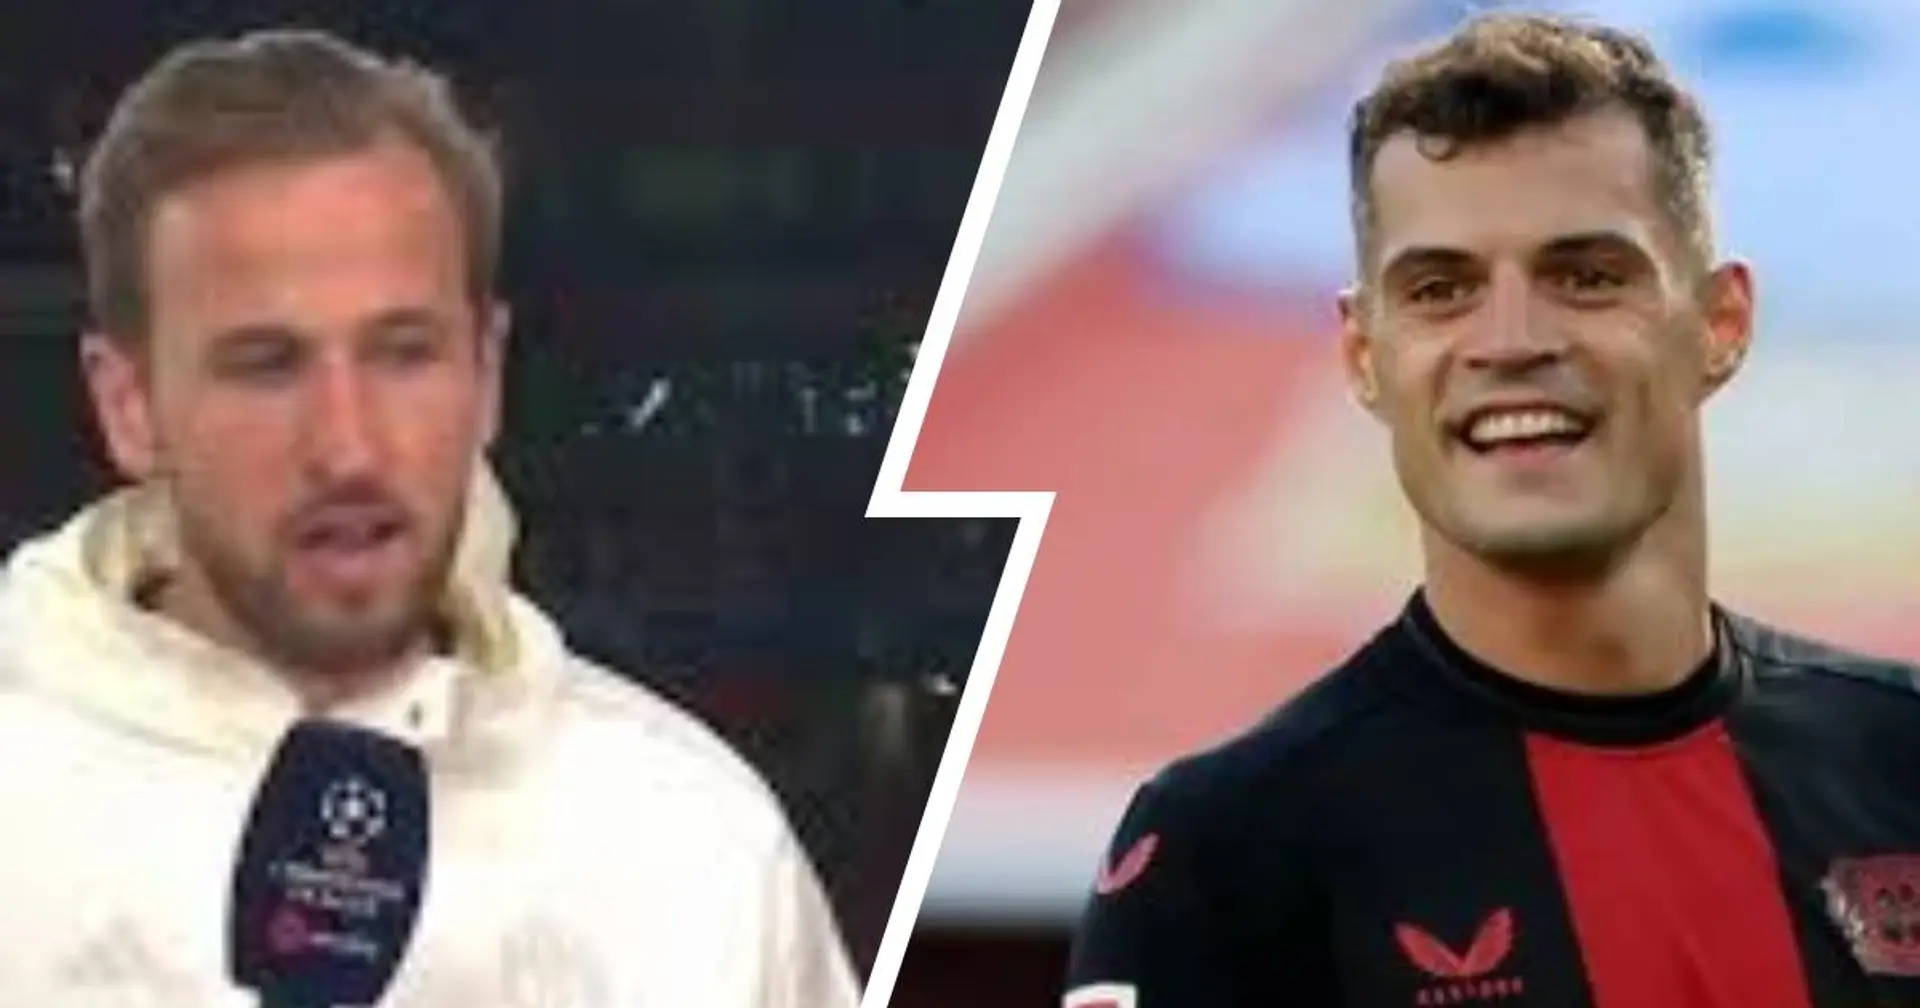 'Granit Xhaka is top of the league': Arsenal fans' brutal chant for Harry Kane at full-time